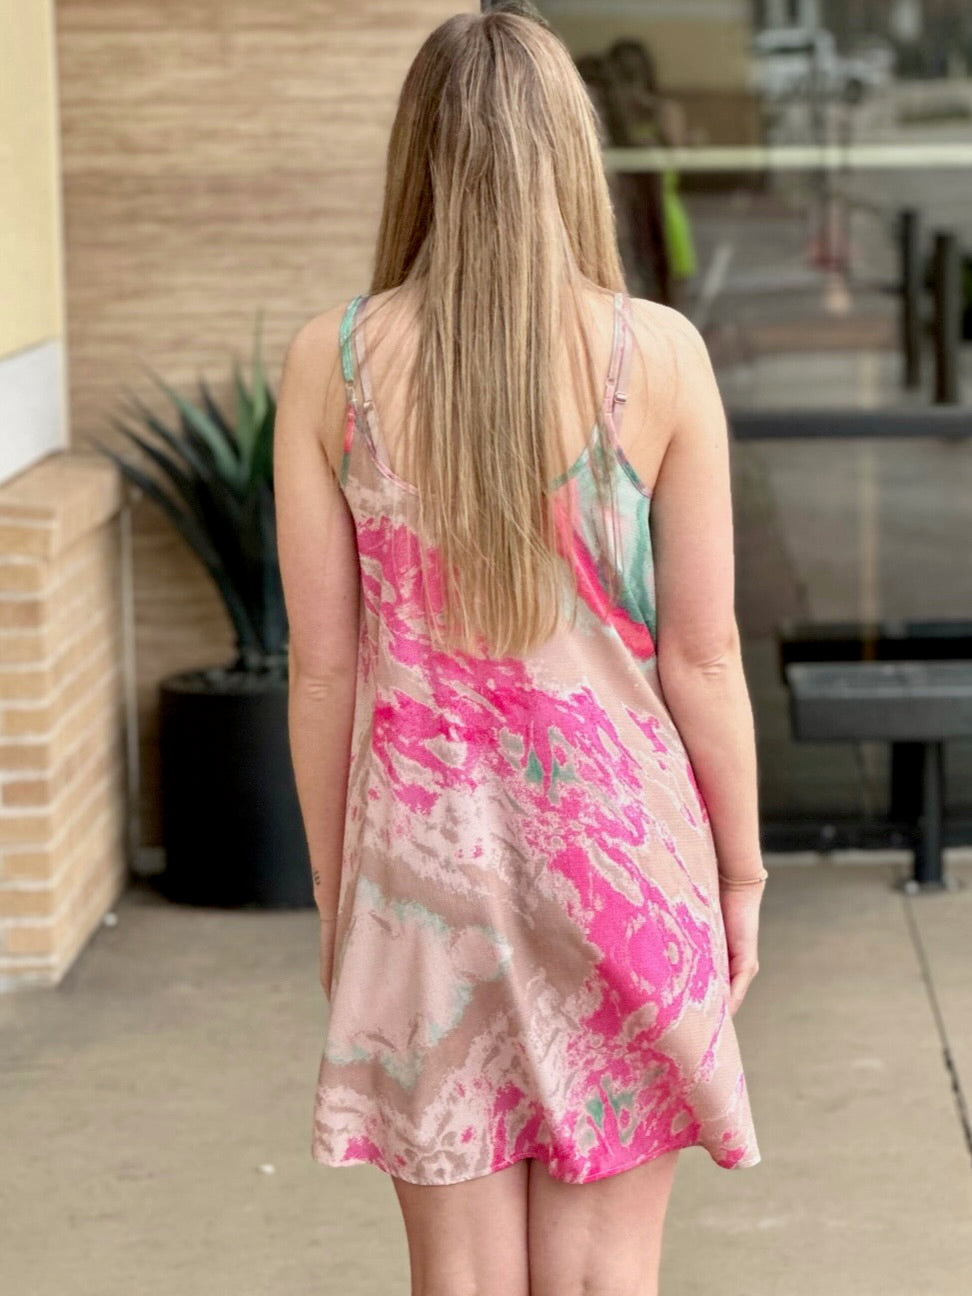 Lexi in pink/green dress back view